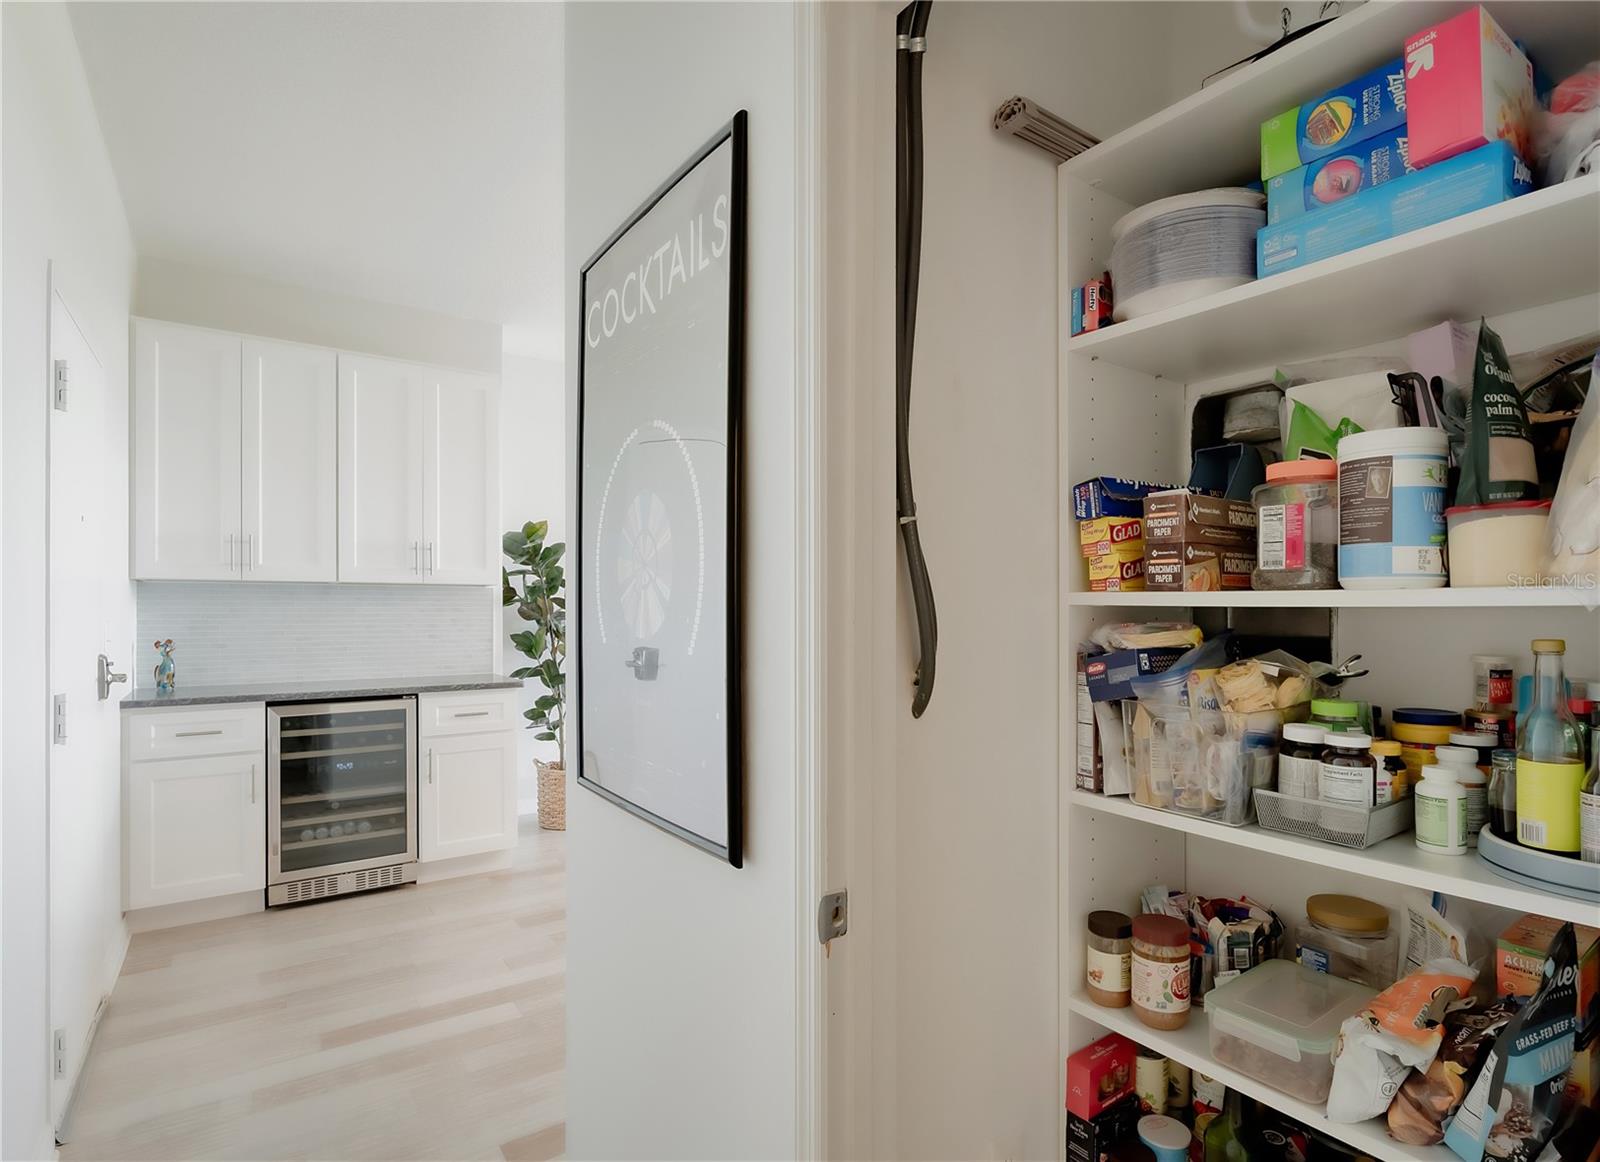 This unit has a full pantry closet!